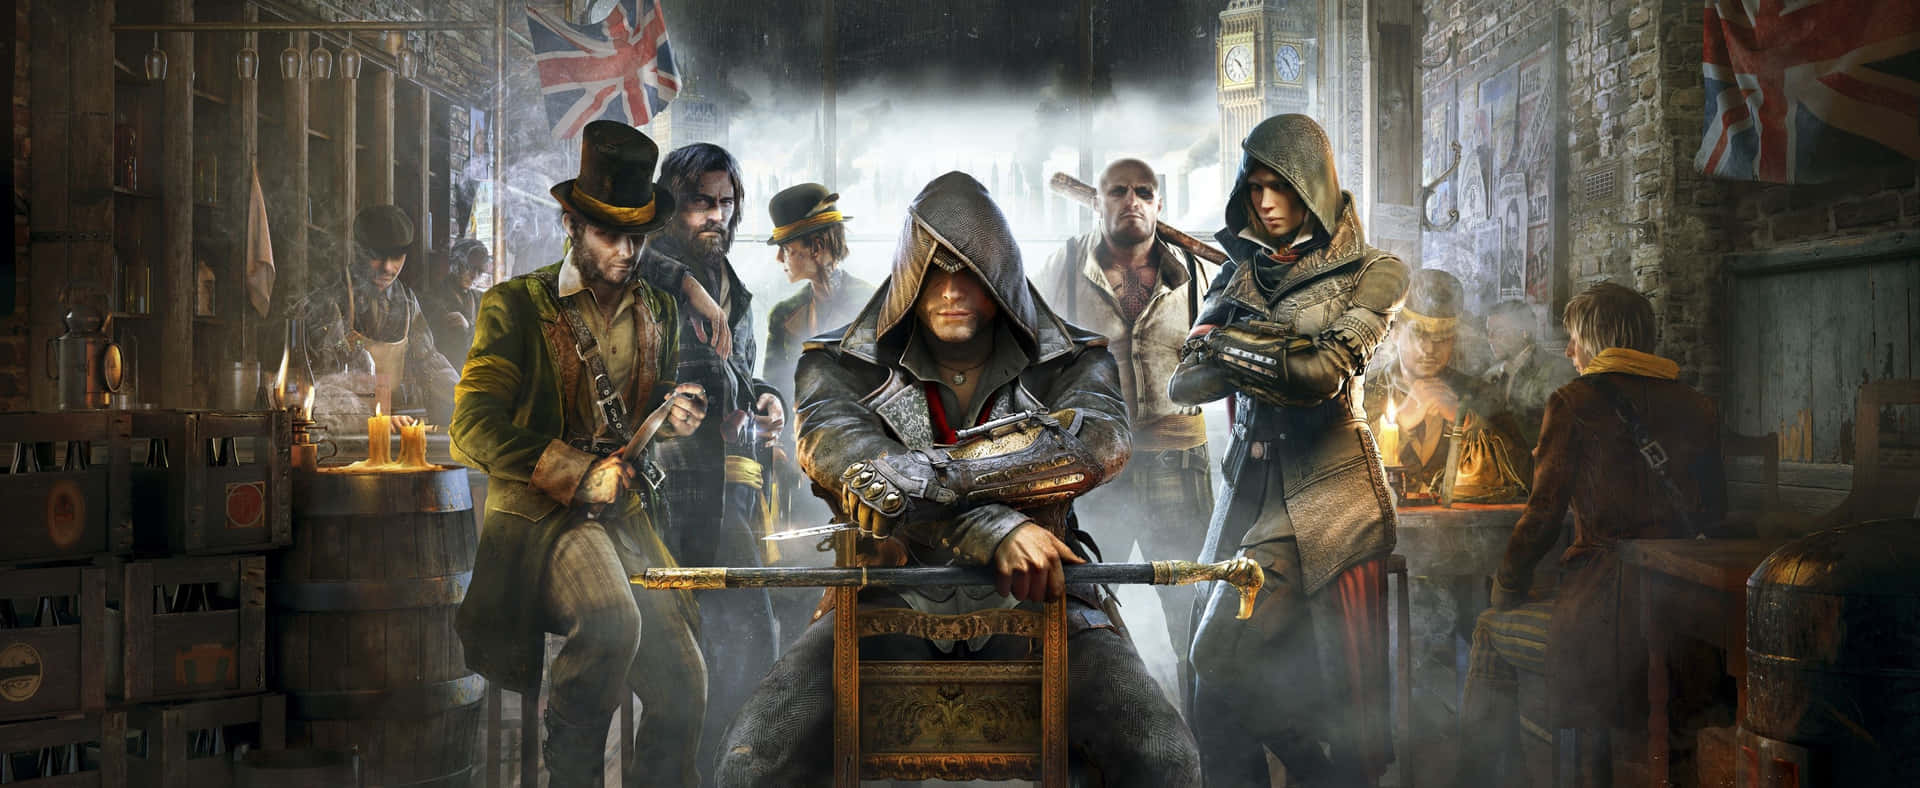 3440x1440spel Assassin's Creed Syndicate (note: This Is A Direct Translation. In Swedish, It Is Common To List The Dimensions First Before The Type Of Image.) Wallpaper